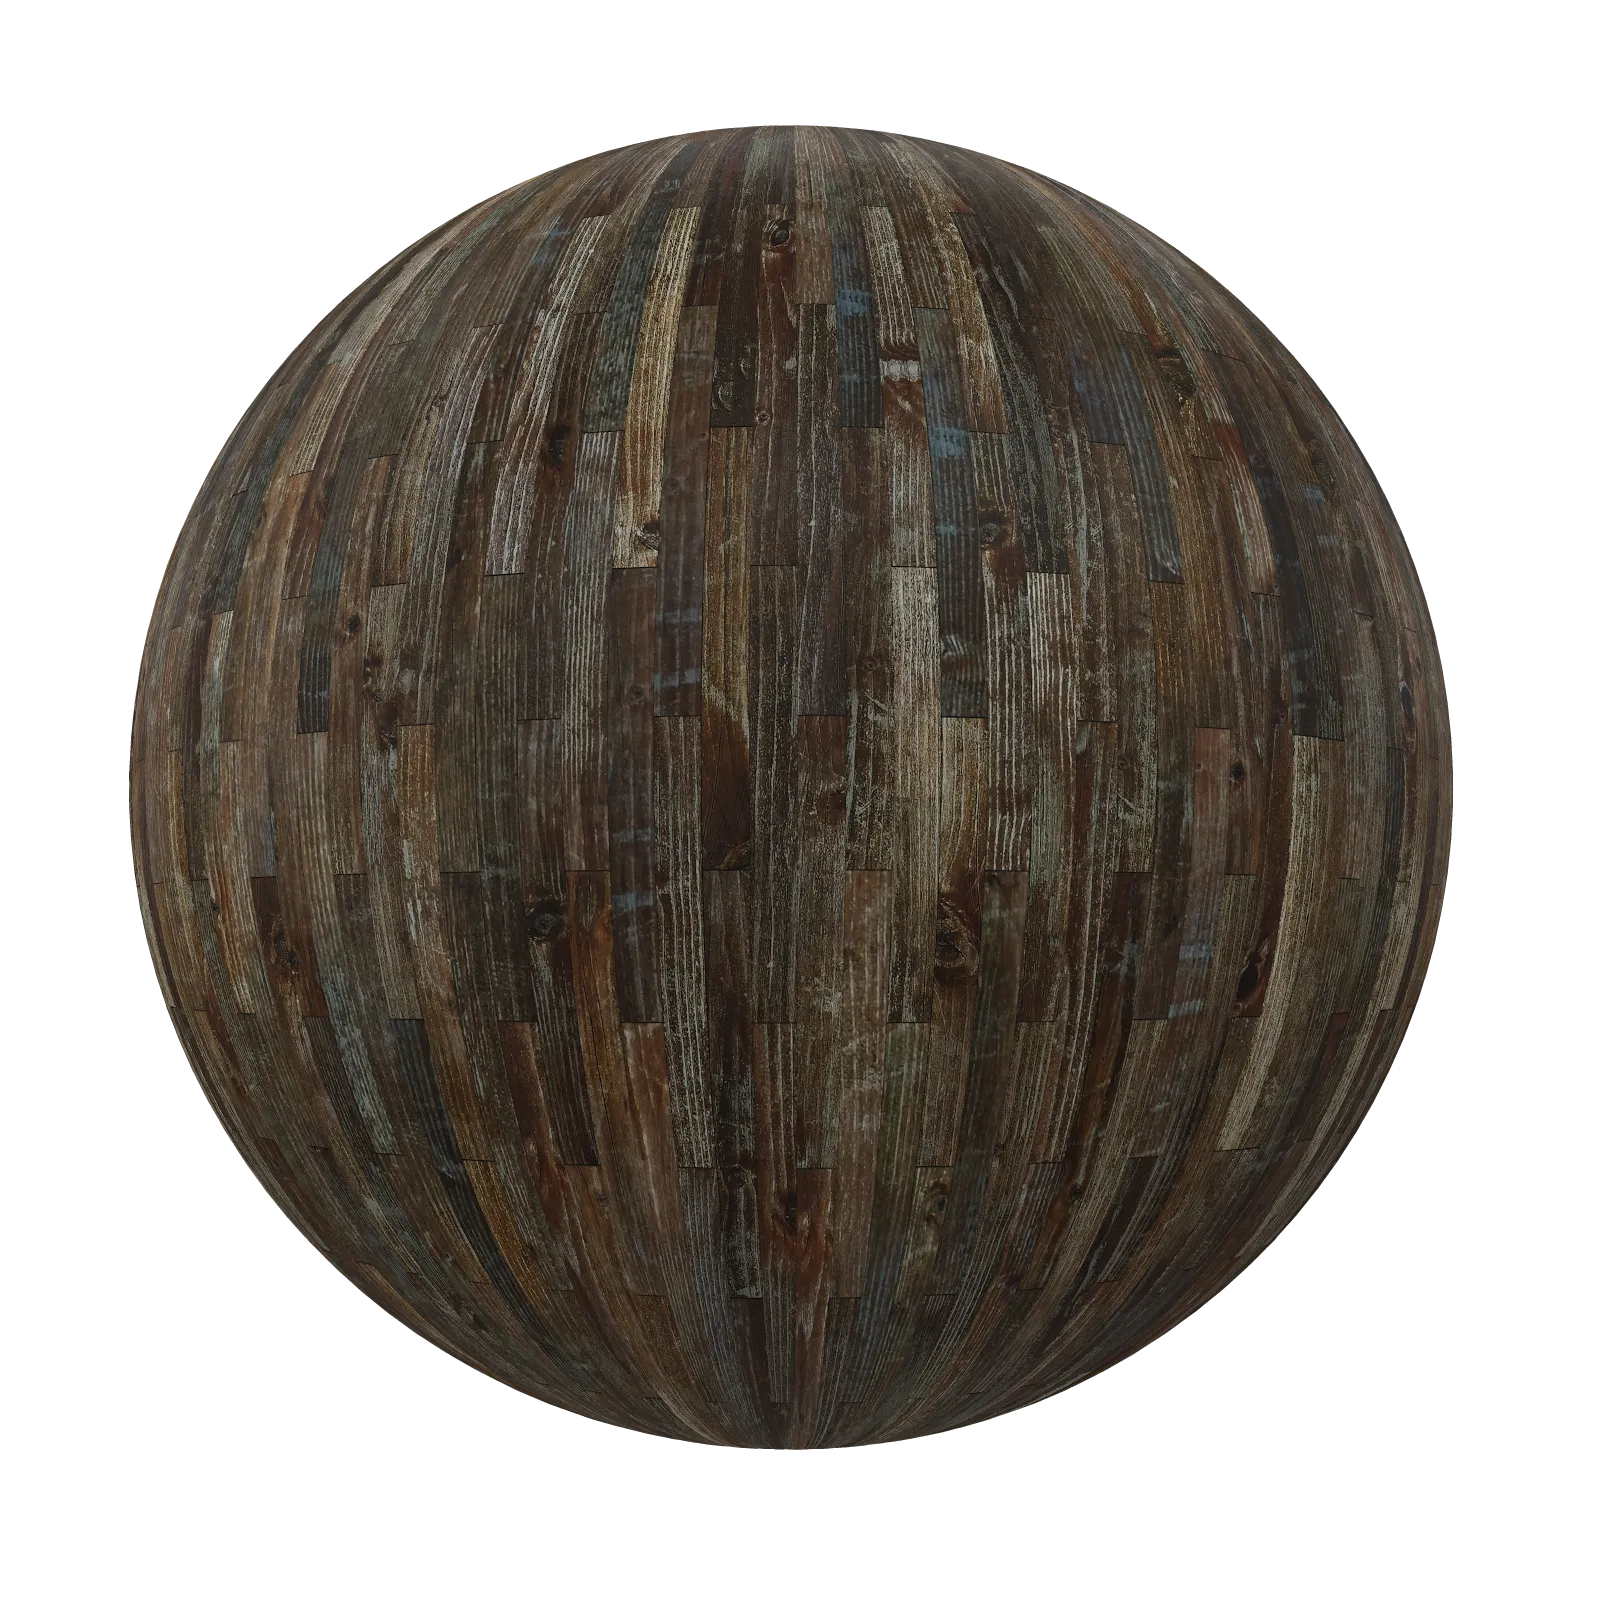 TEXTURES – WOOD – Old Wood Tiles 8